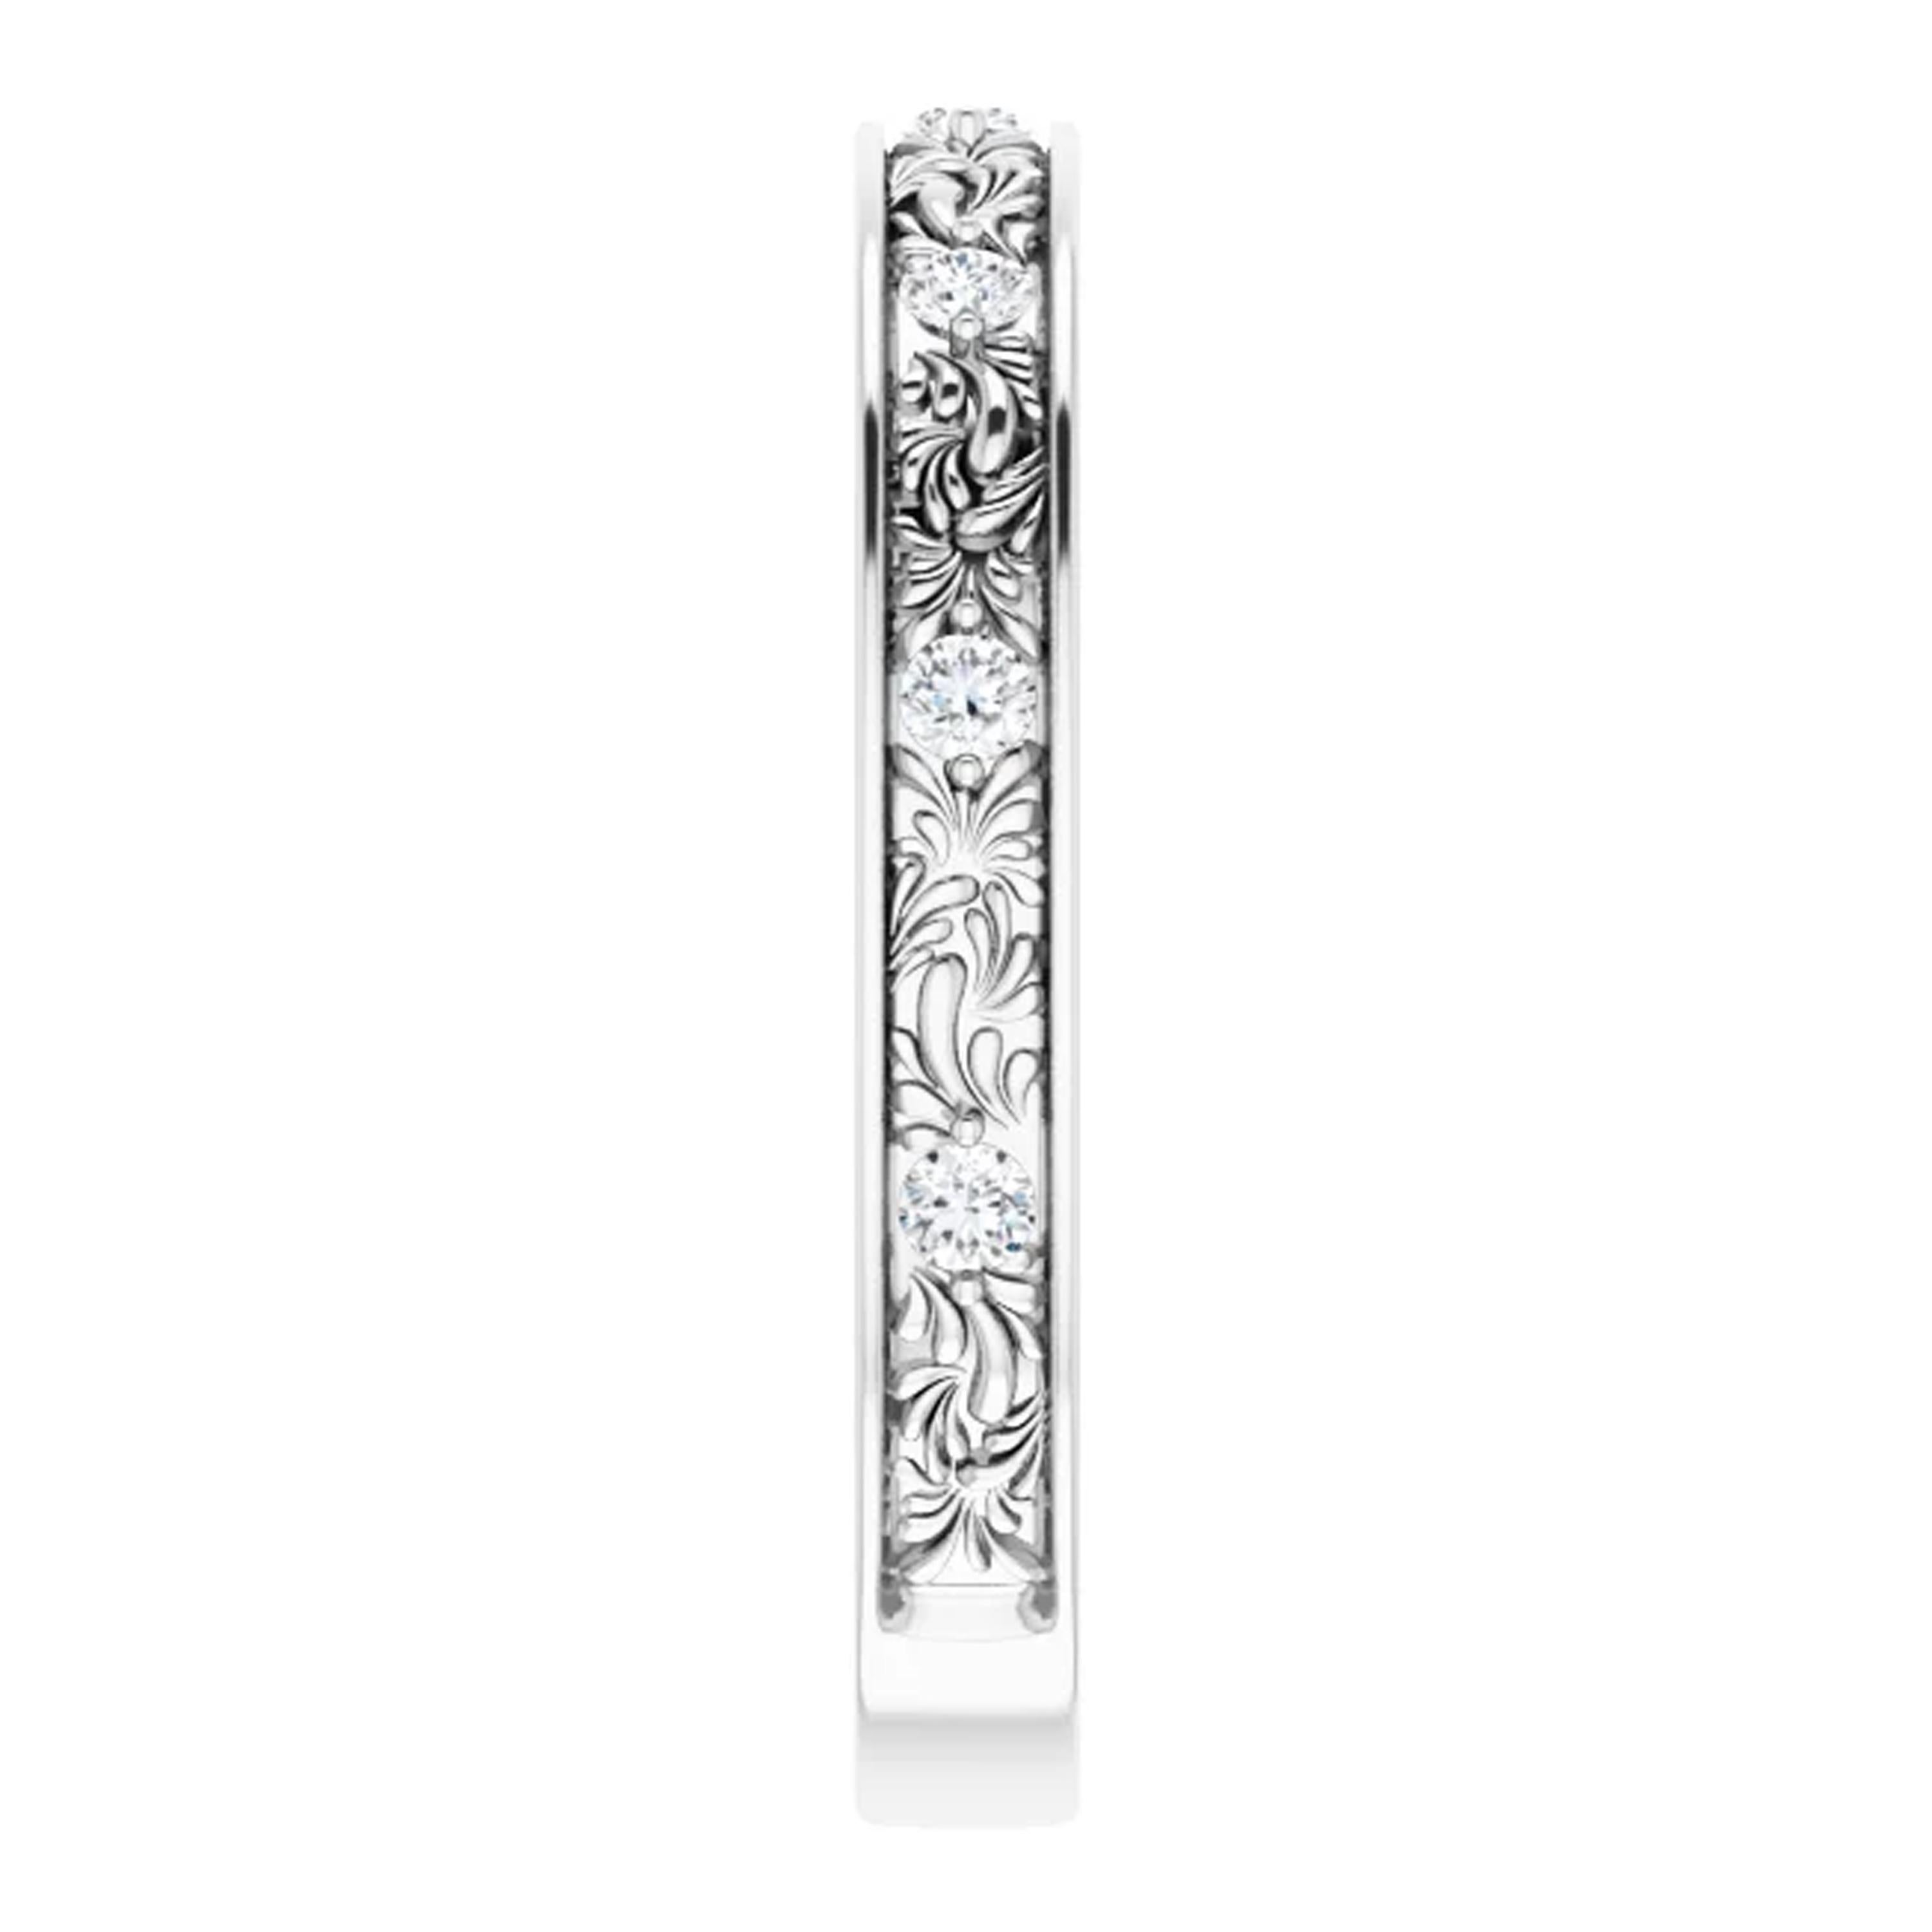 Shimmering white diamonds adorn the shank of this dainty wedding ring. Handcrafted meticulously in 18k white gold, intricate filigrees decorate the band. Finished with a high polish and rhodium plated for additional brilliance, this vintage style